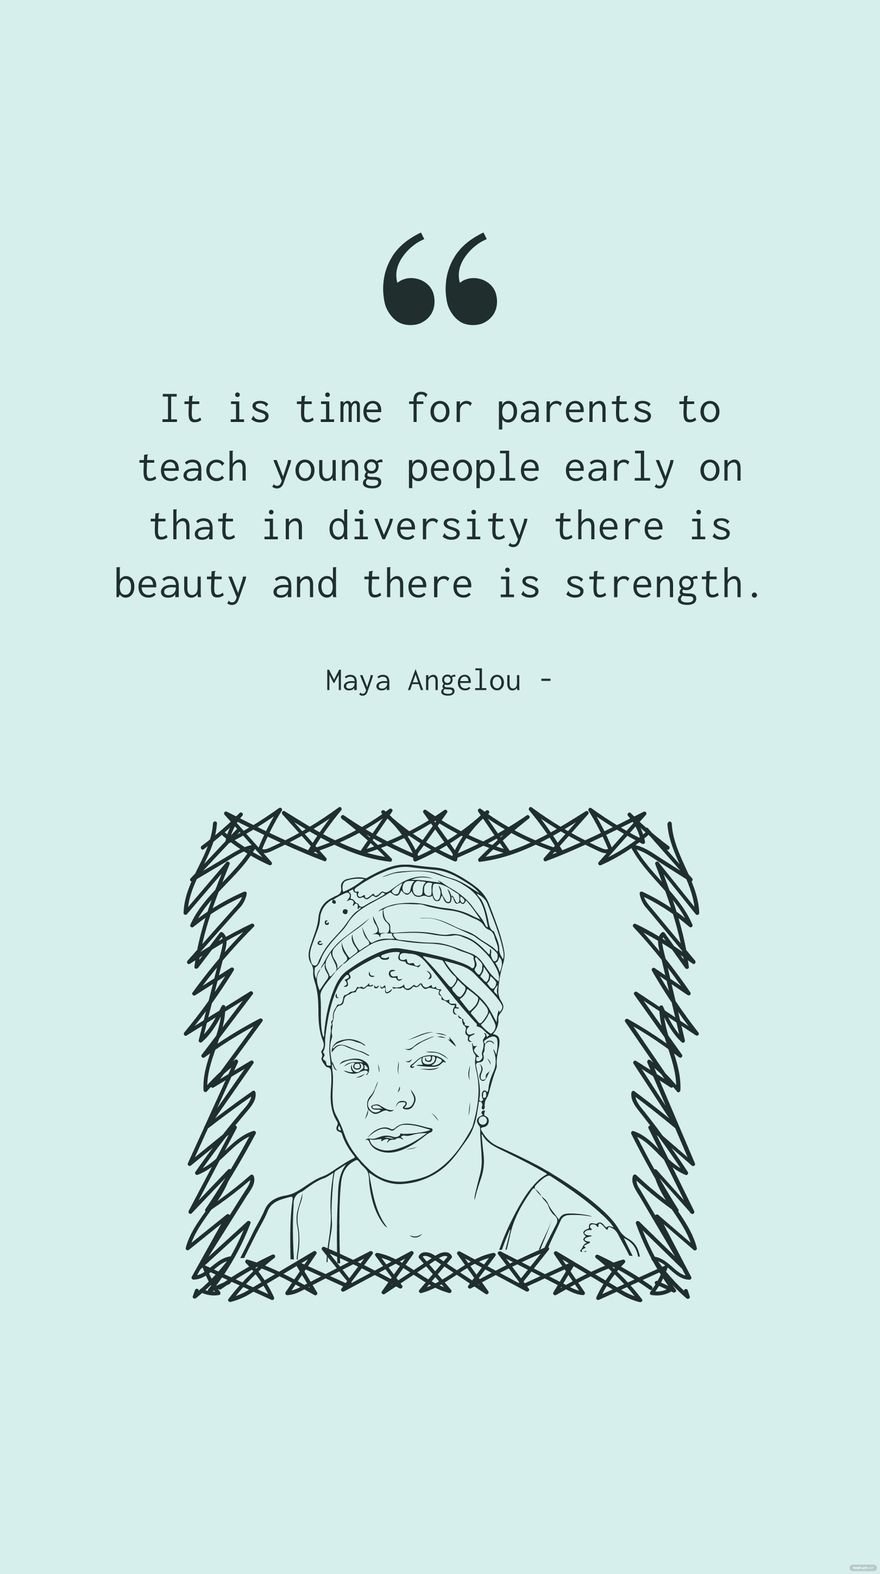 Maya Angelou - It is time for parents to teach young people early on that in diversity there is beauty and there is strength.